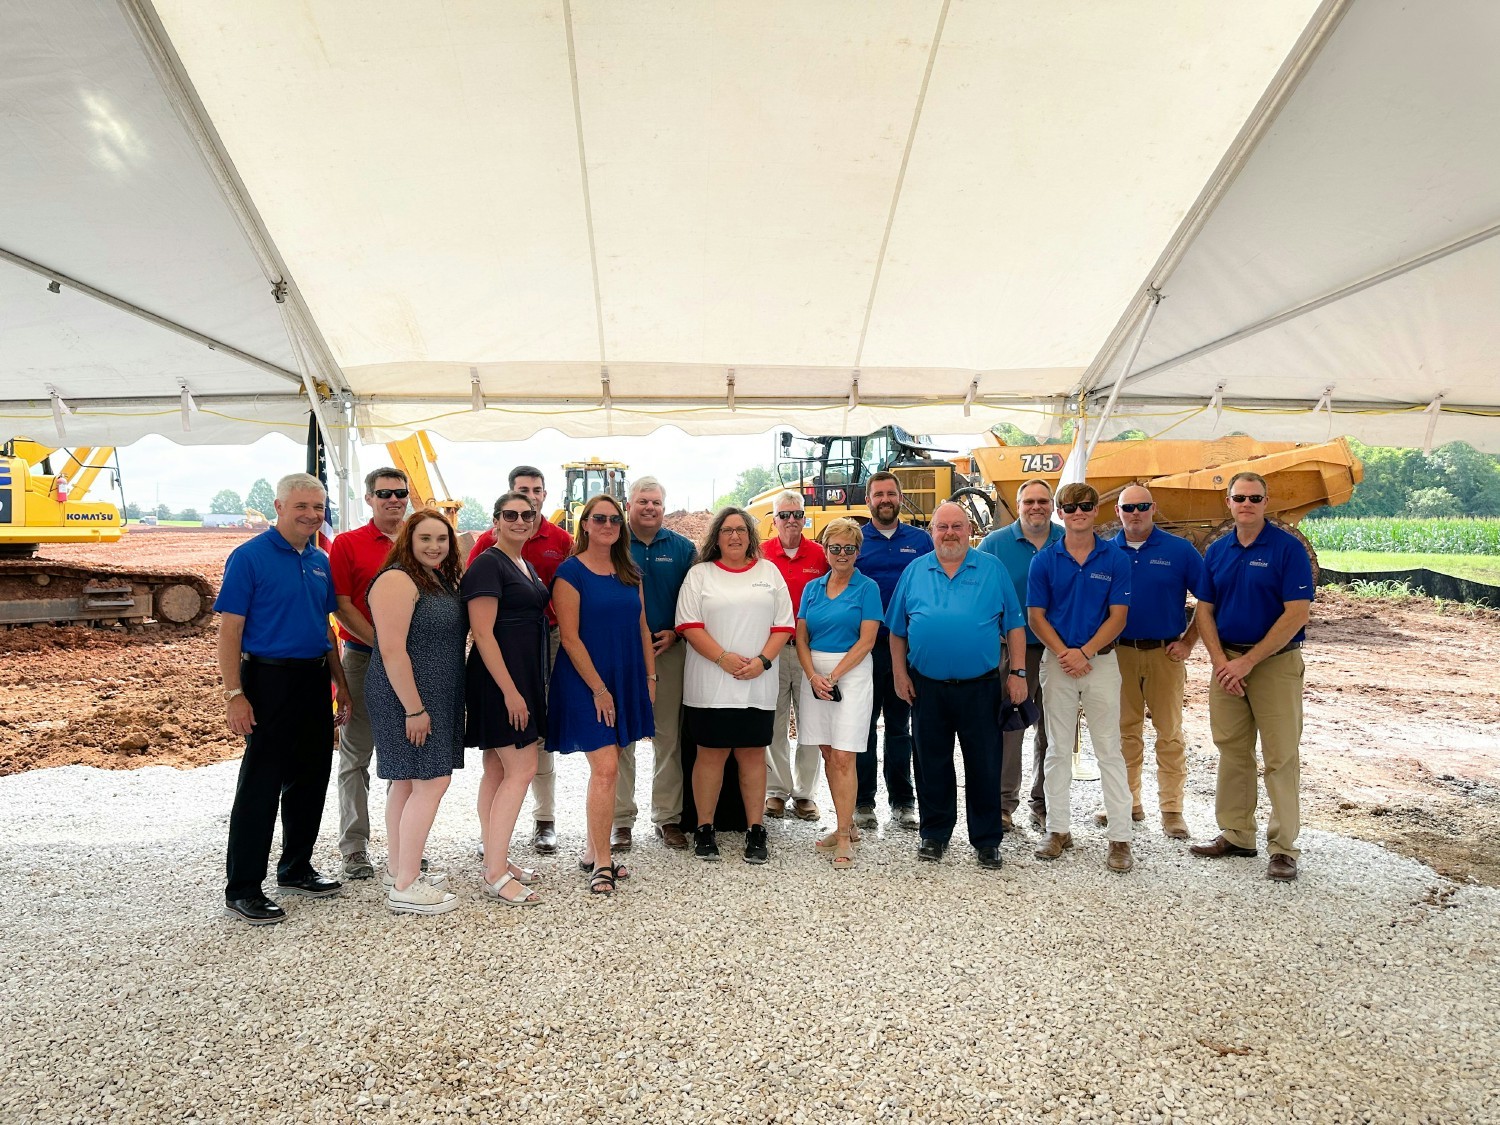 Freedom team photo at our Freedom Industrial Park groundbreaking.  A milestone for our added construction business line.